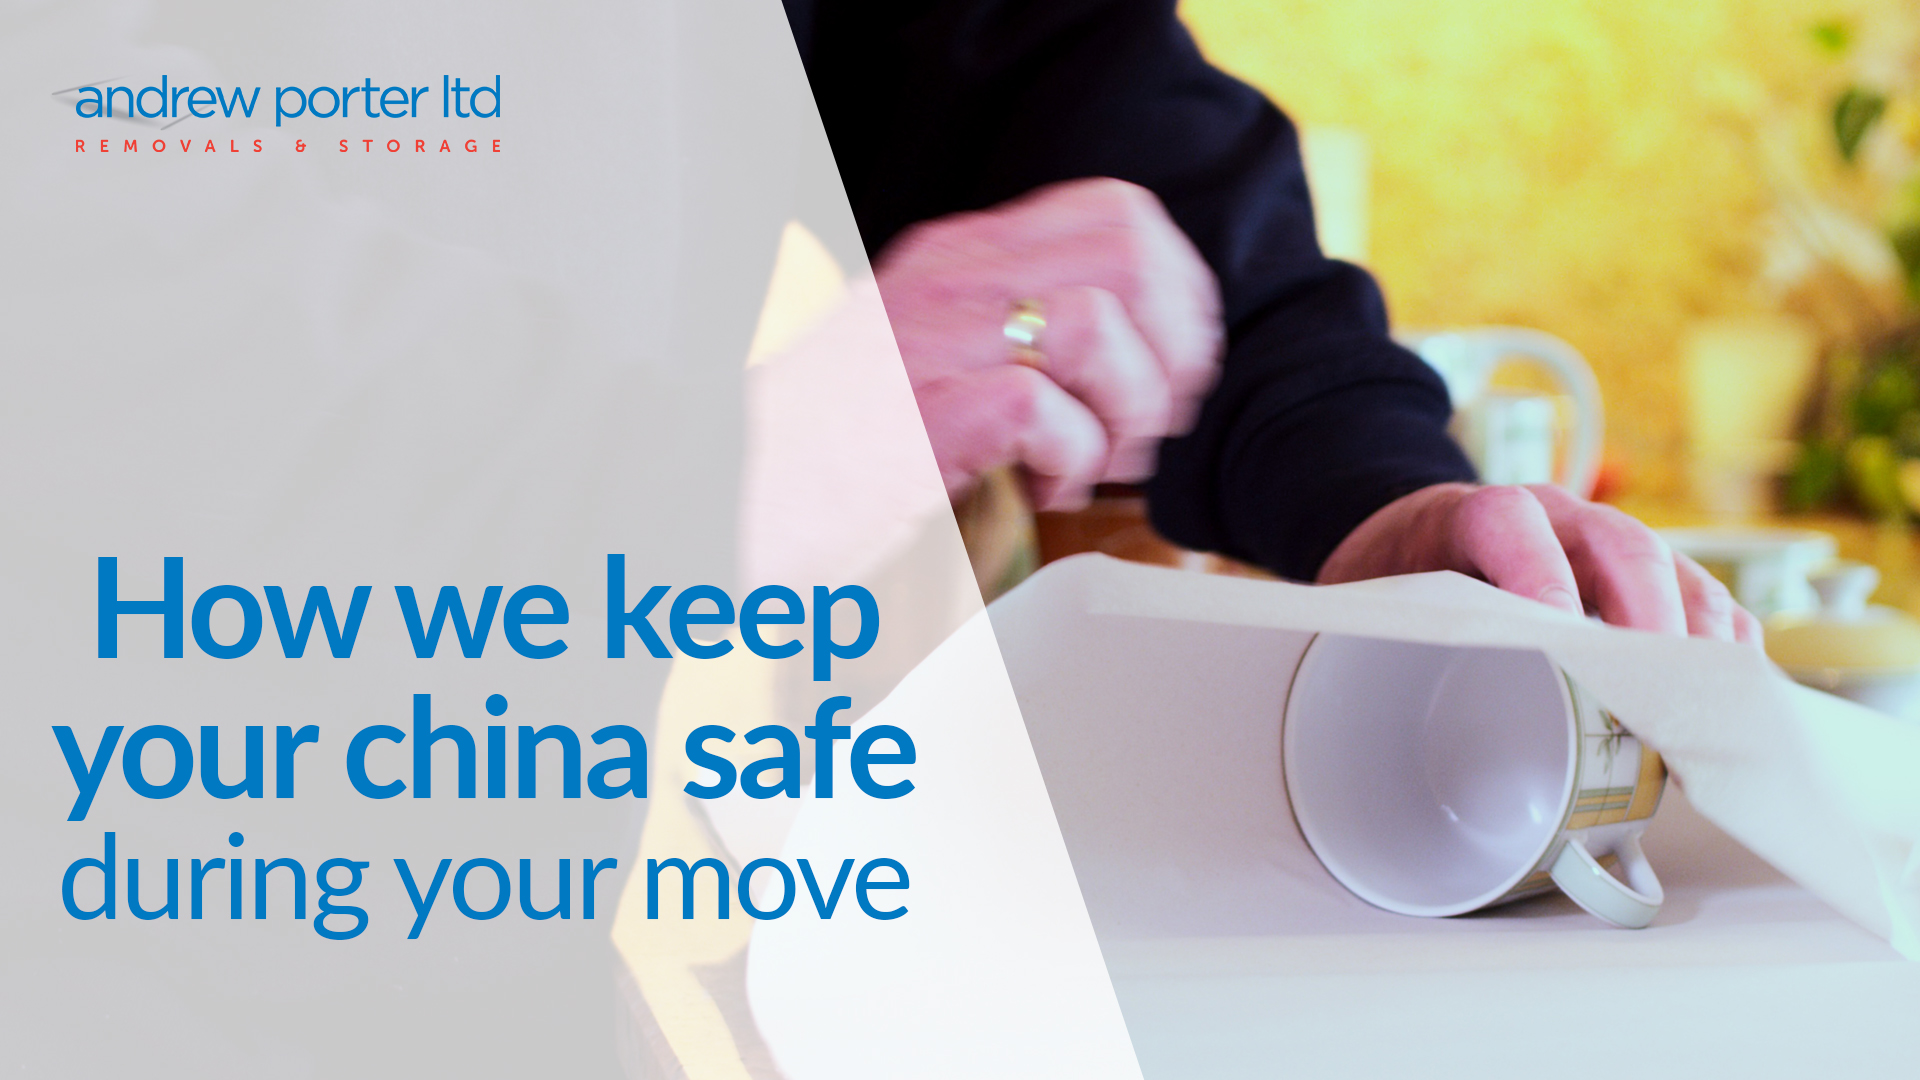 How we keep your china safe during your move